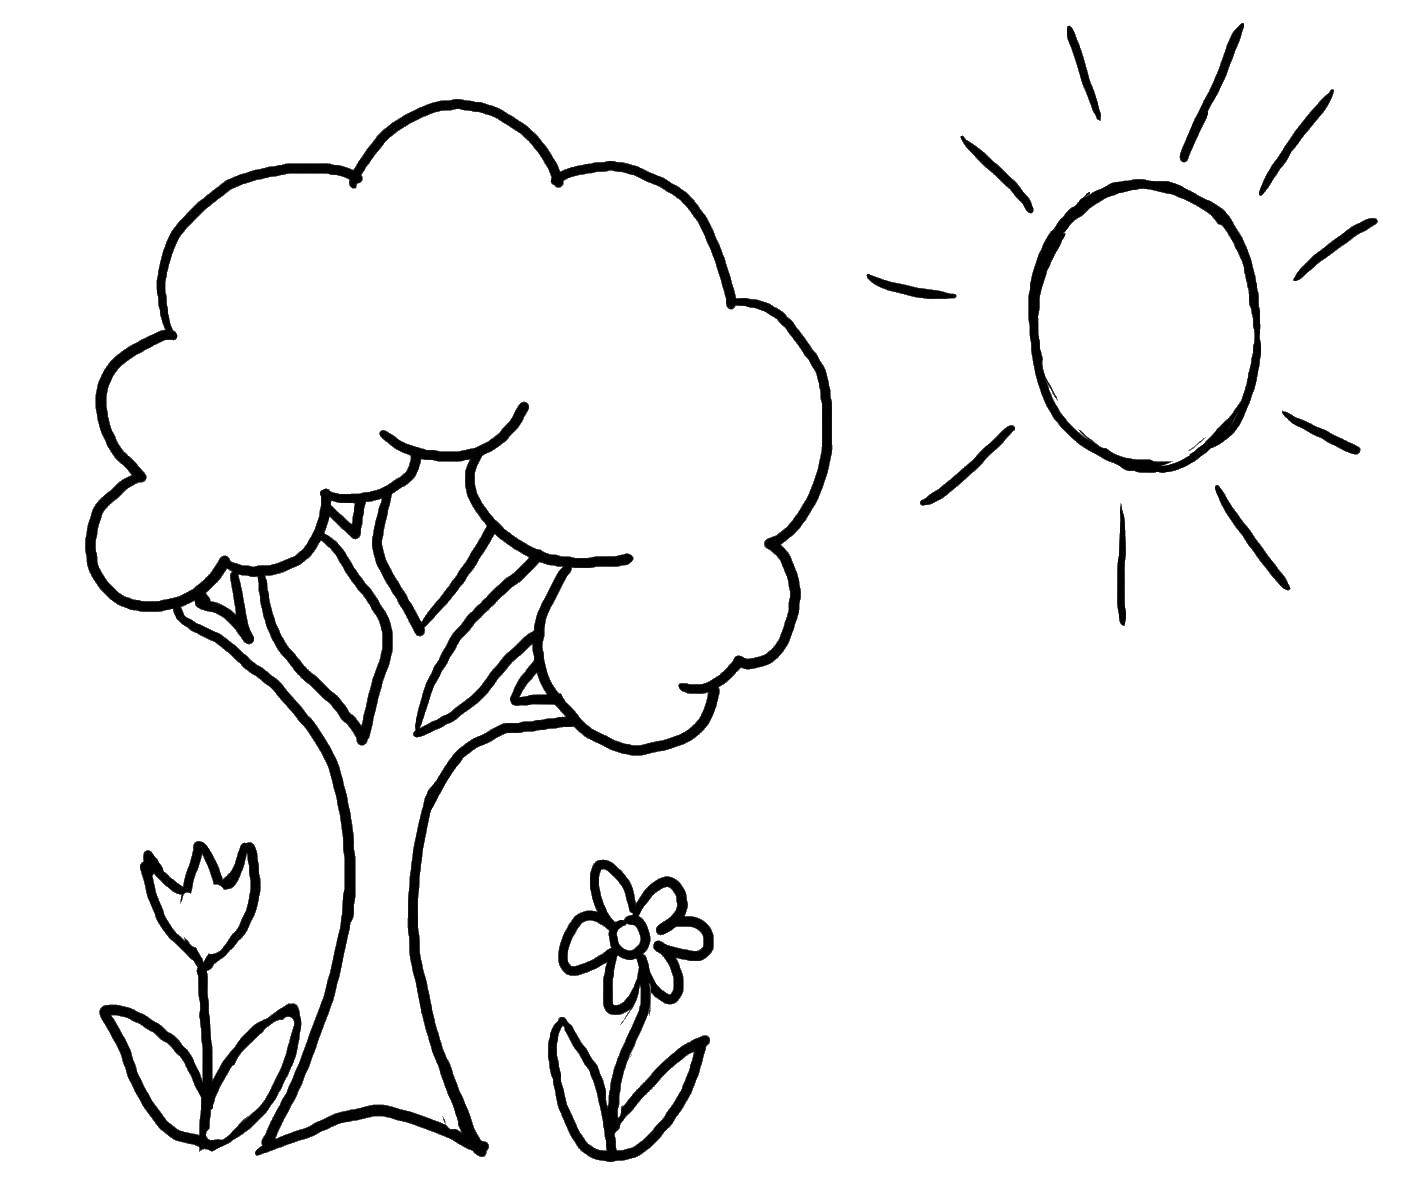 Coloring The tree and the sun. Category The contour of the tree. Tags:  tree, flowers, sun.